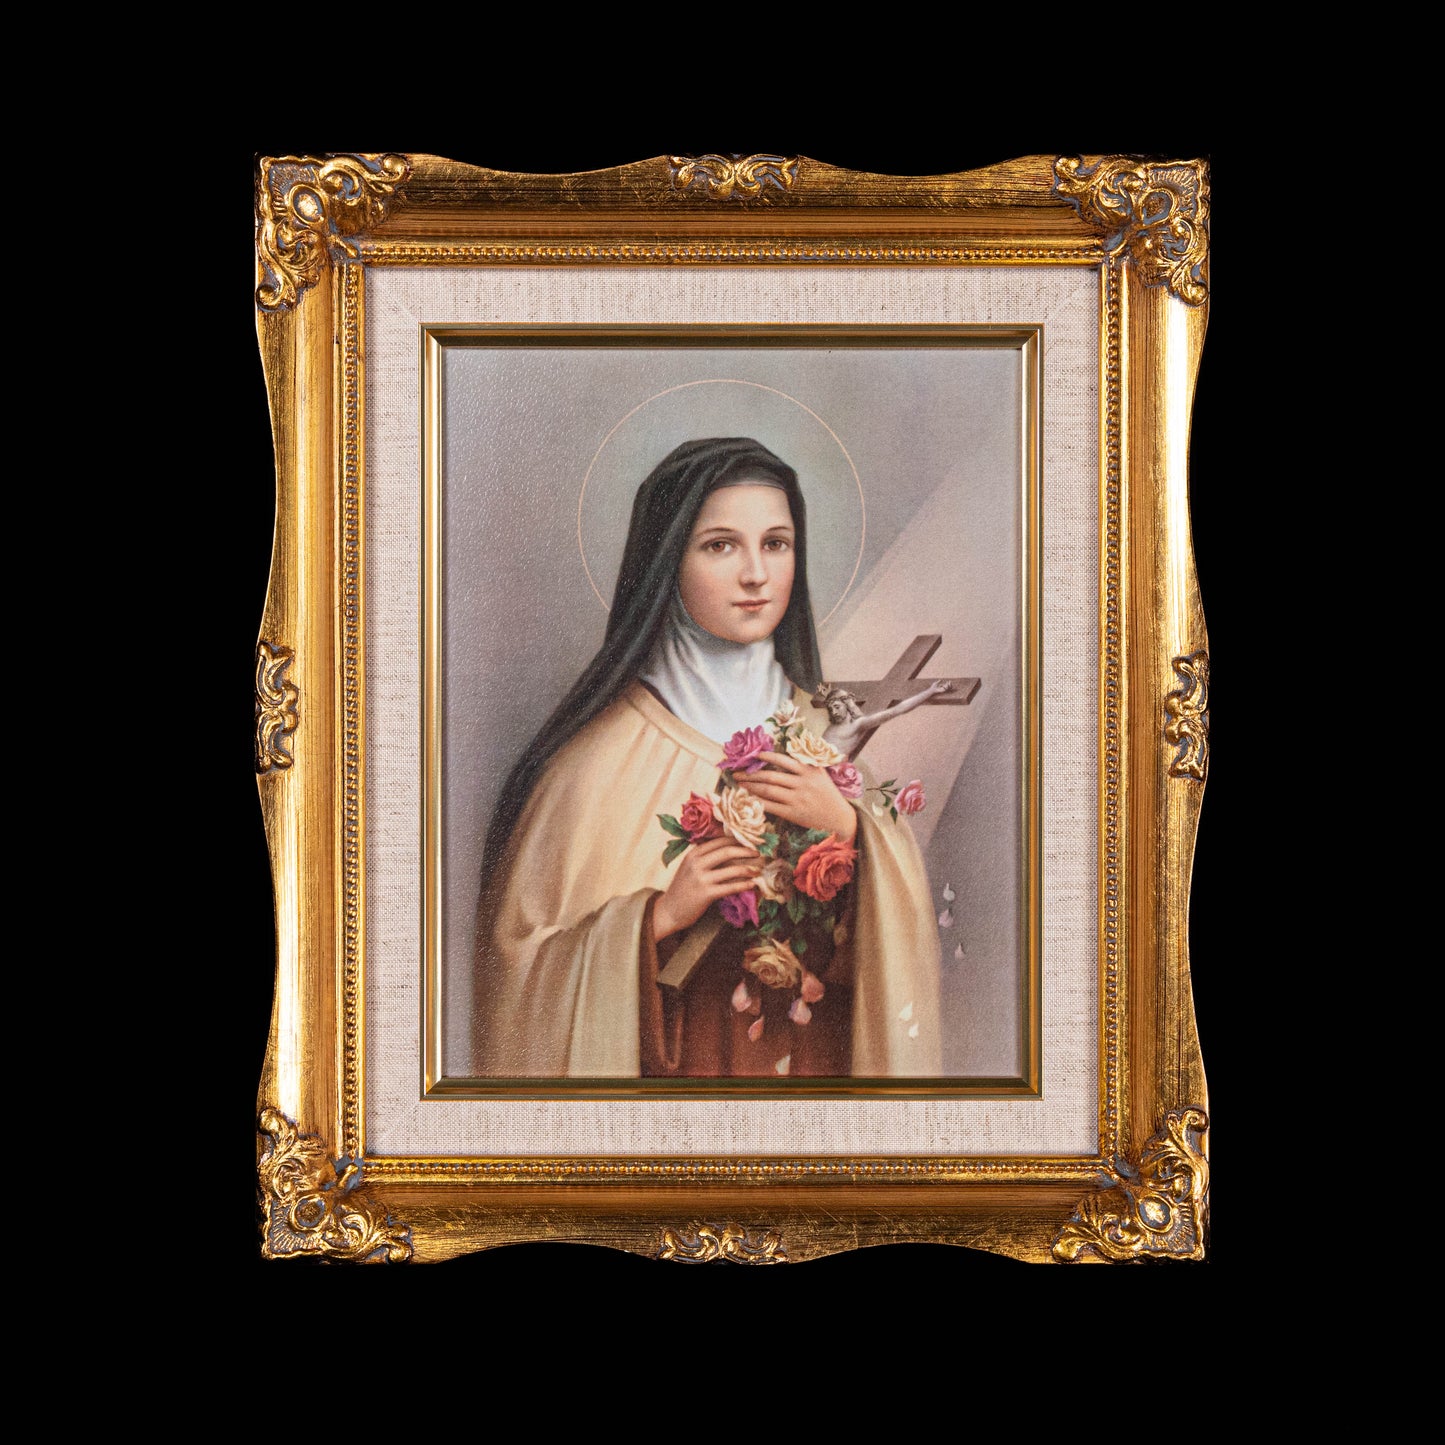 St. Therese of Lisieux Textured Art in Ornate Gold-Leaf Frame